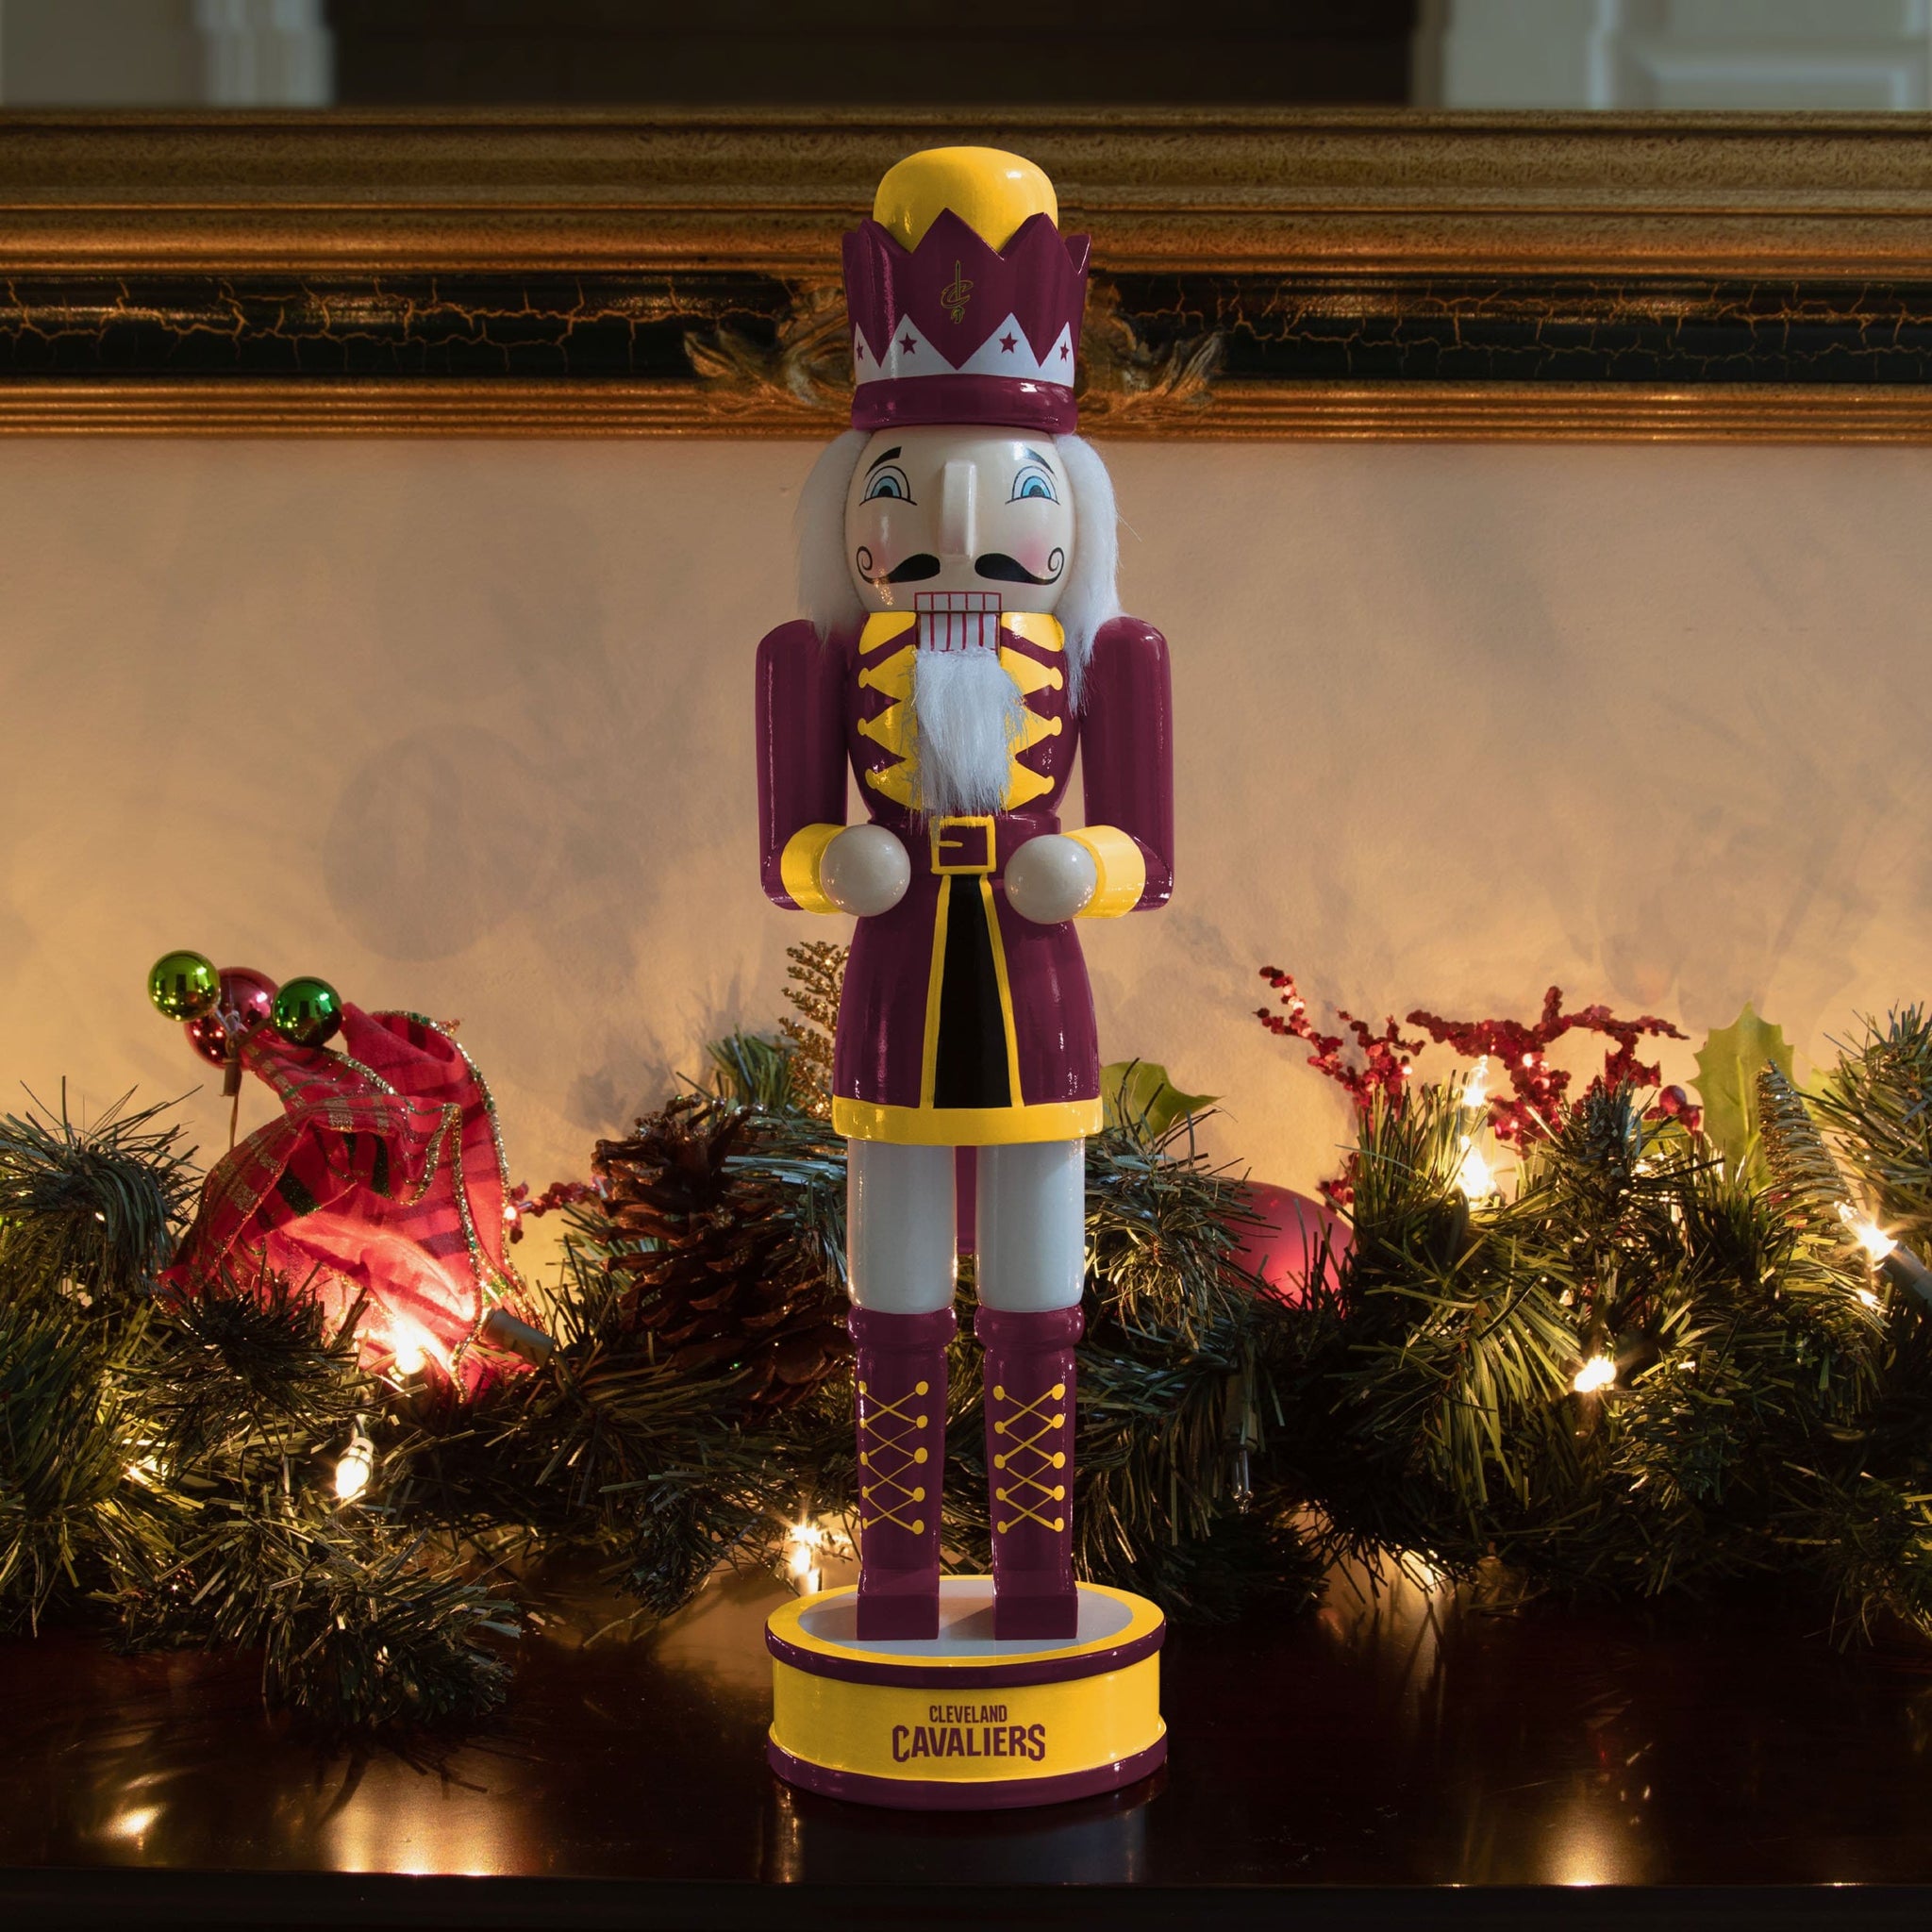 Official Cleveland Cavaliers Holiday Decorations, Christmas